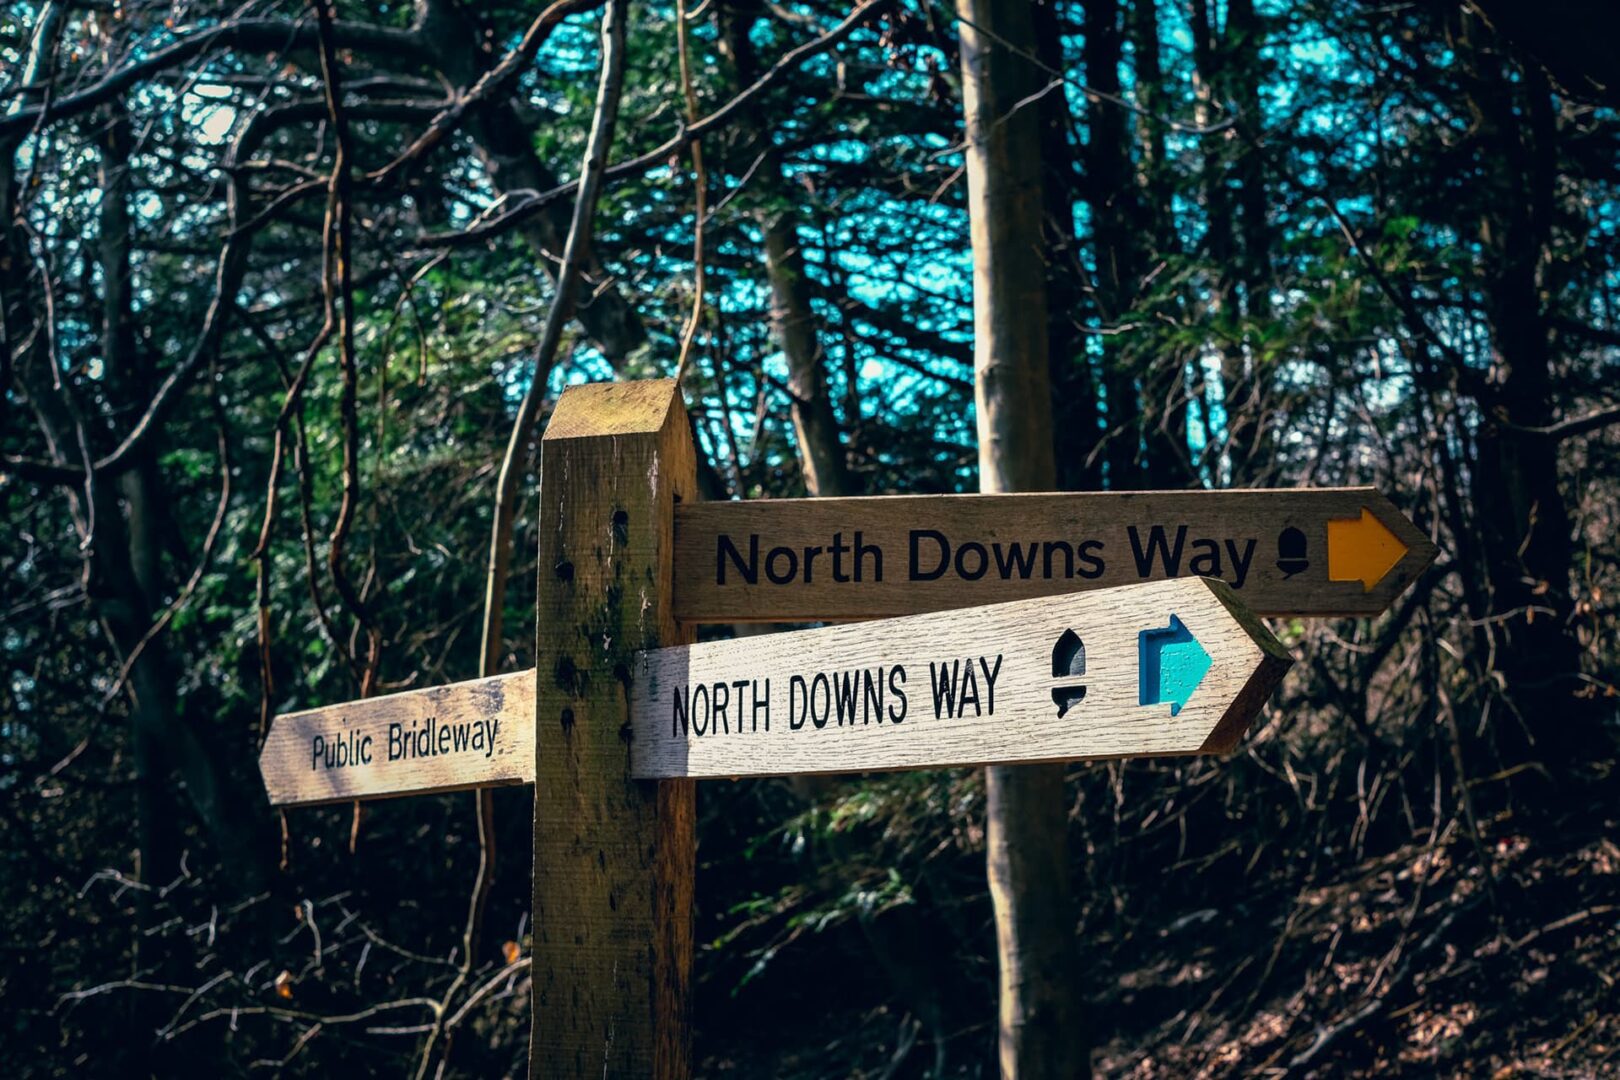 North Downs Way trail sign